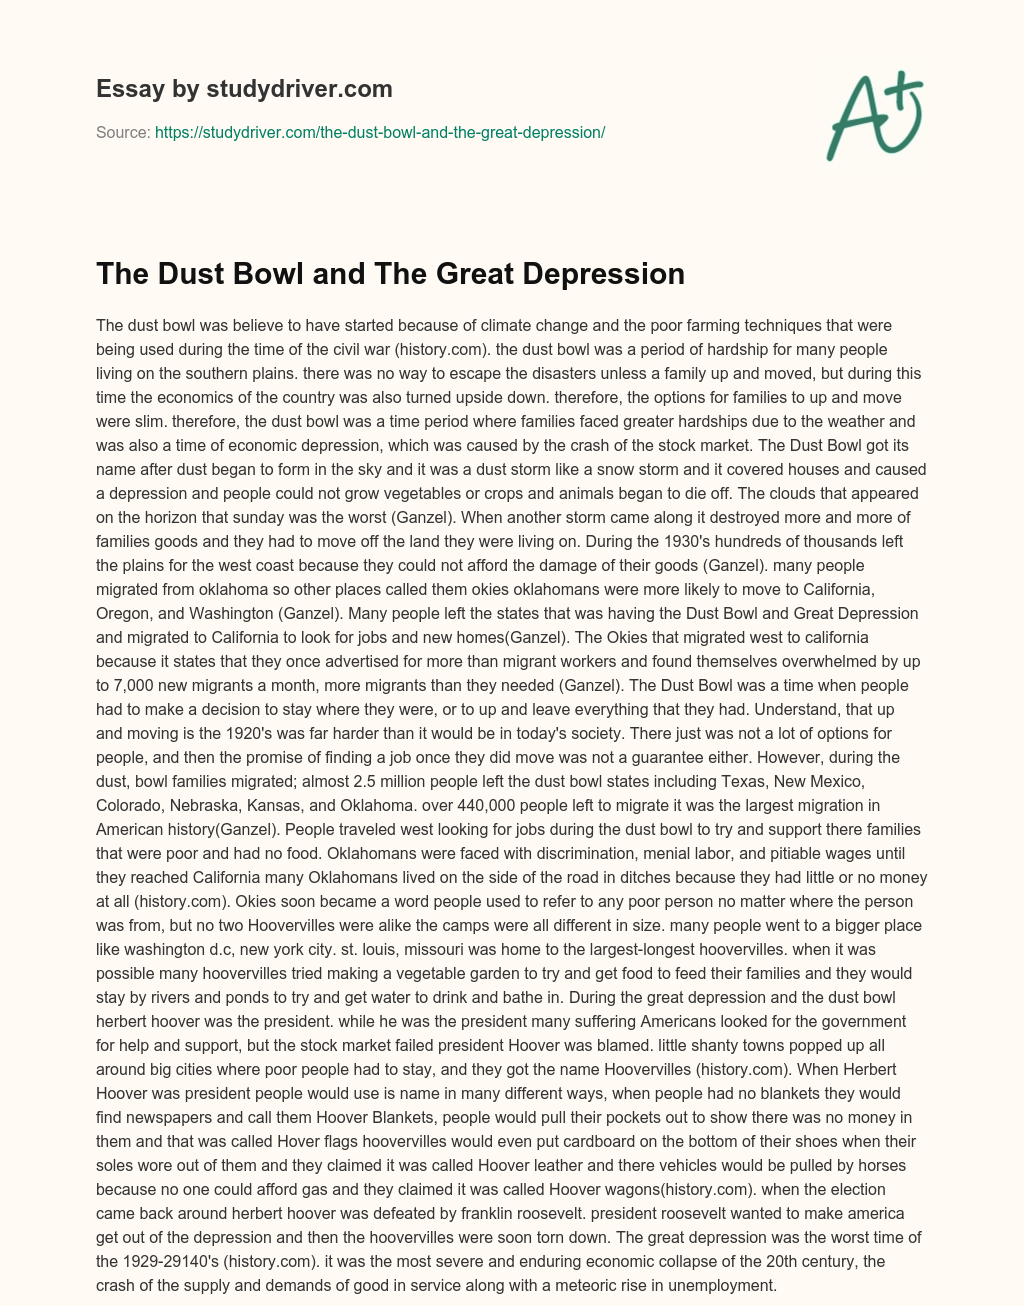 The Dust Bowl and the Great Depression essay